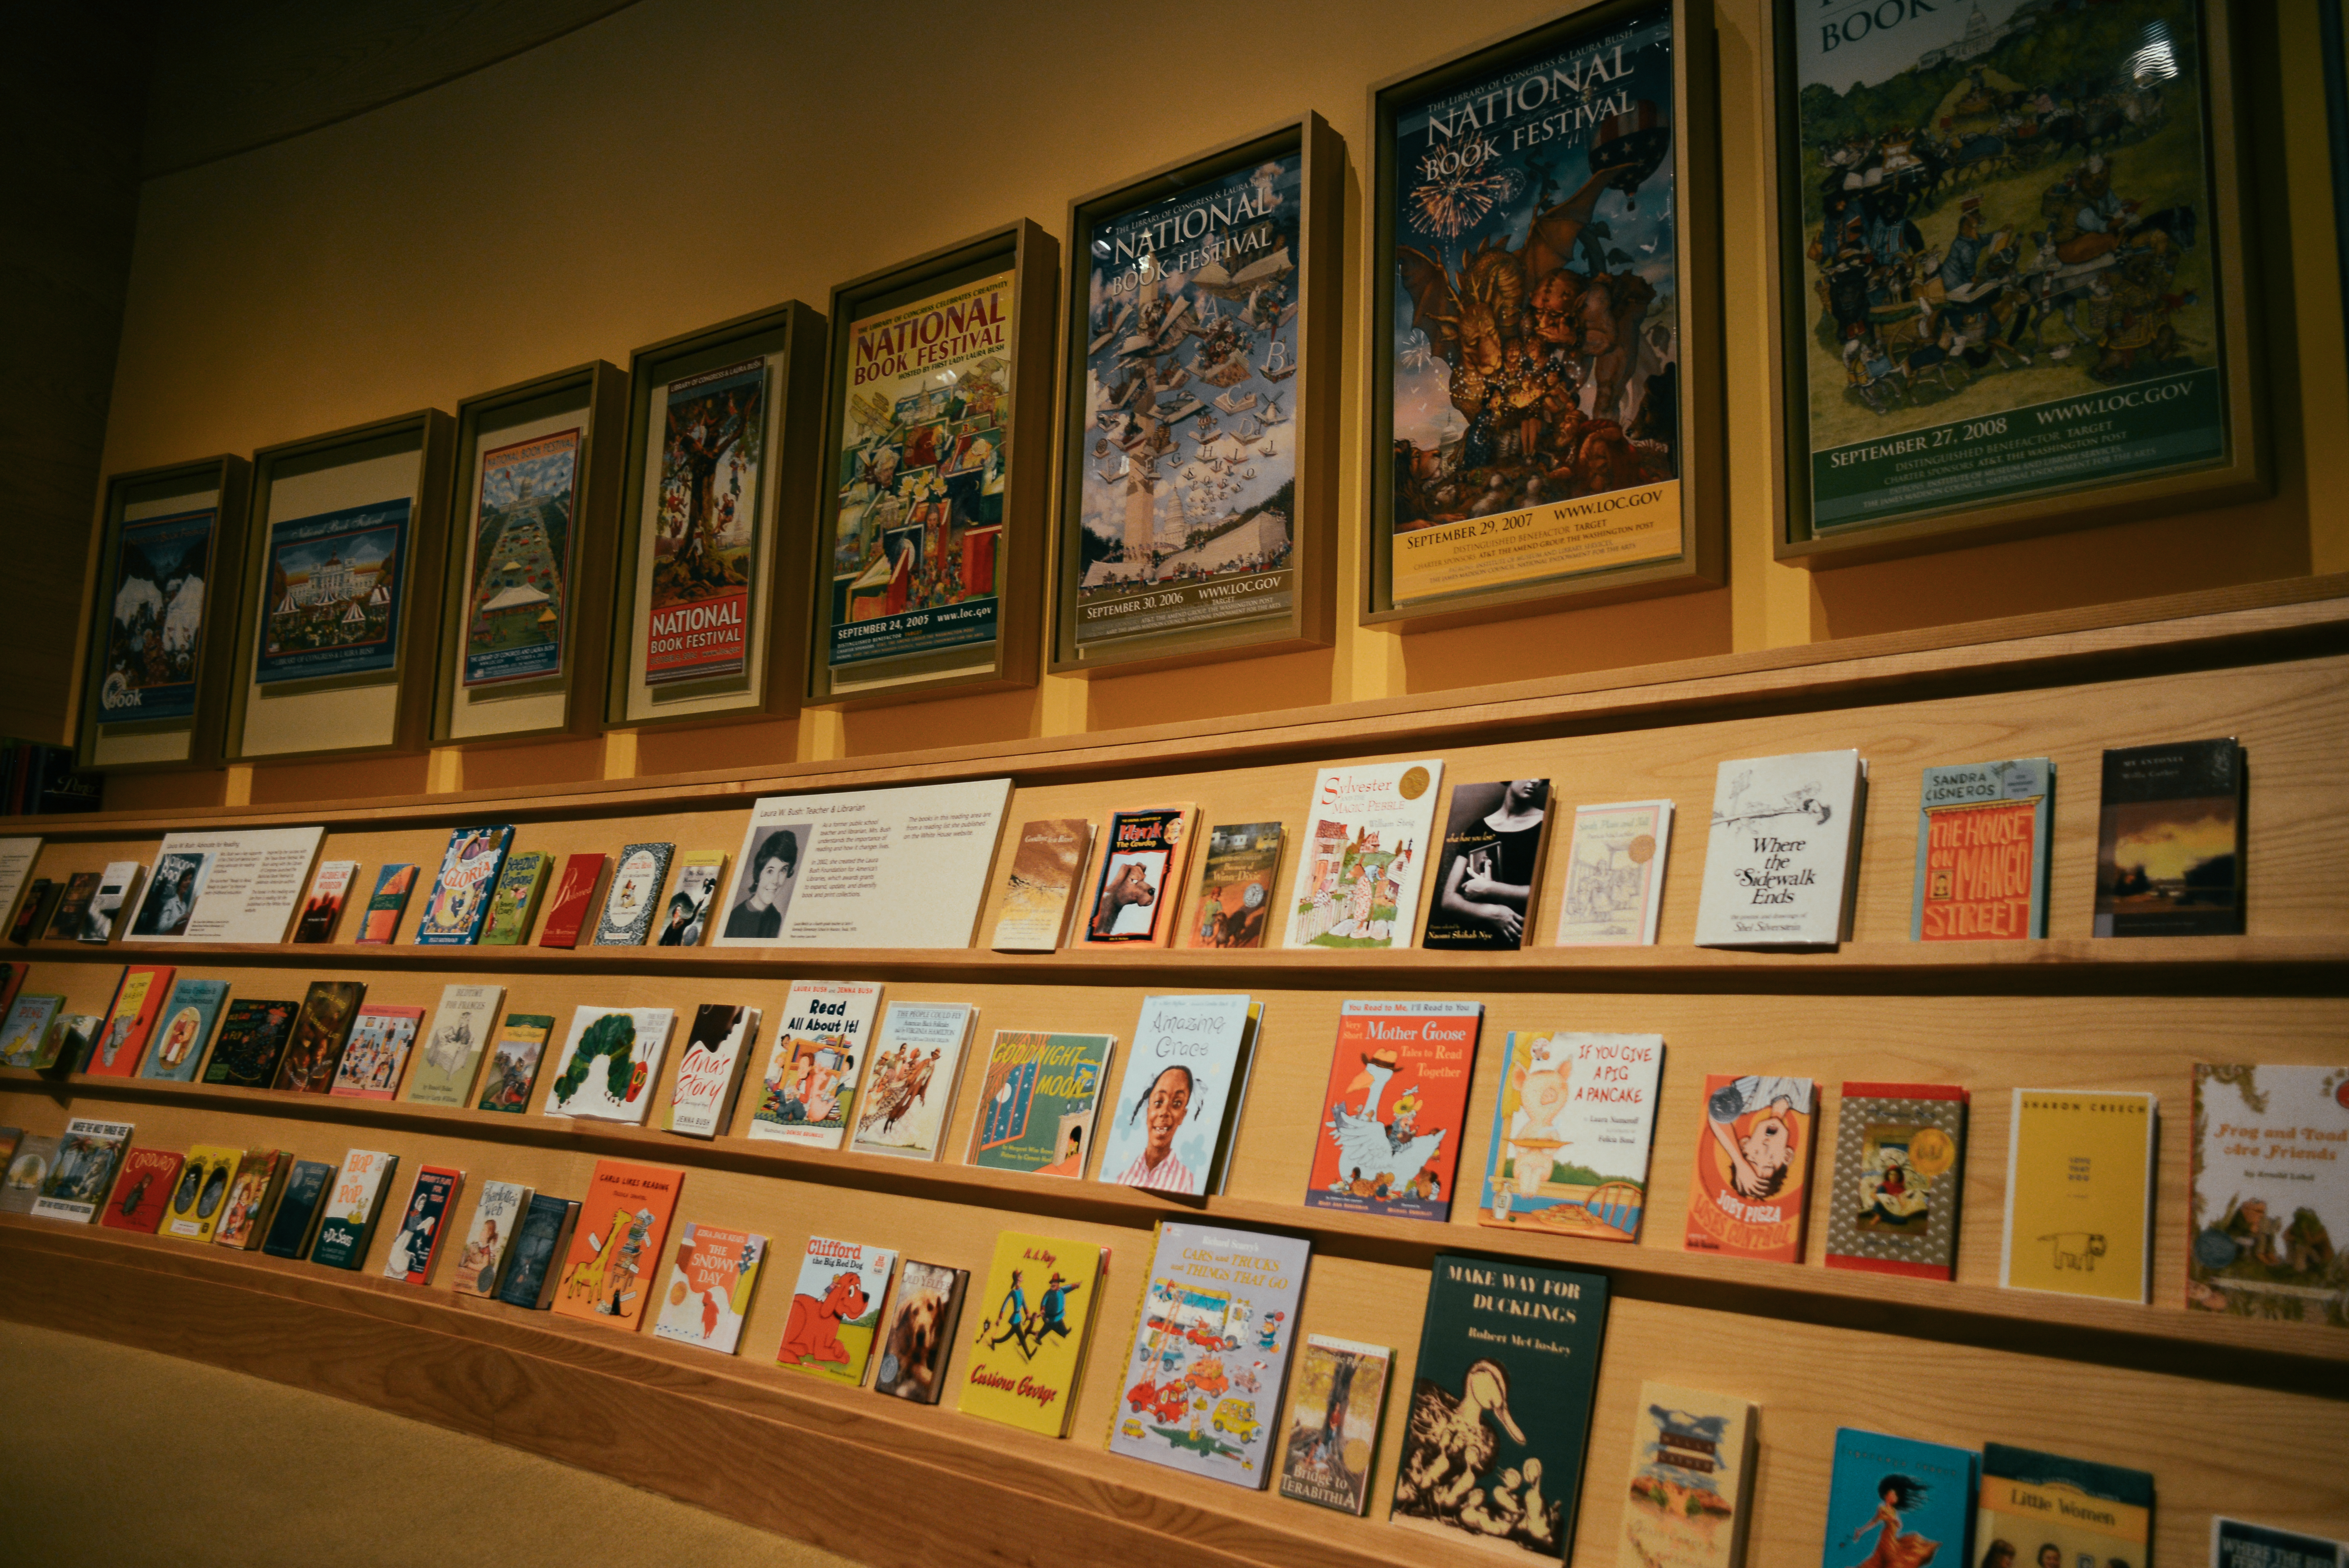 A view of the reading area in the No Child Left Behind area of the George W Bush museum